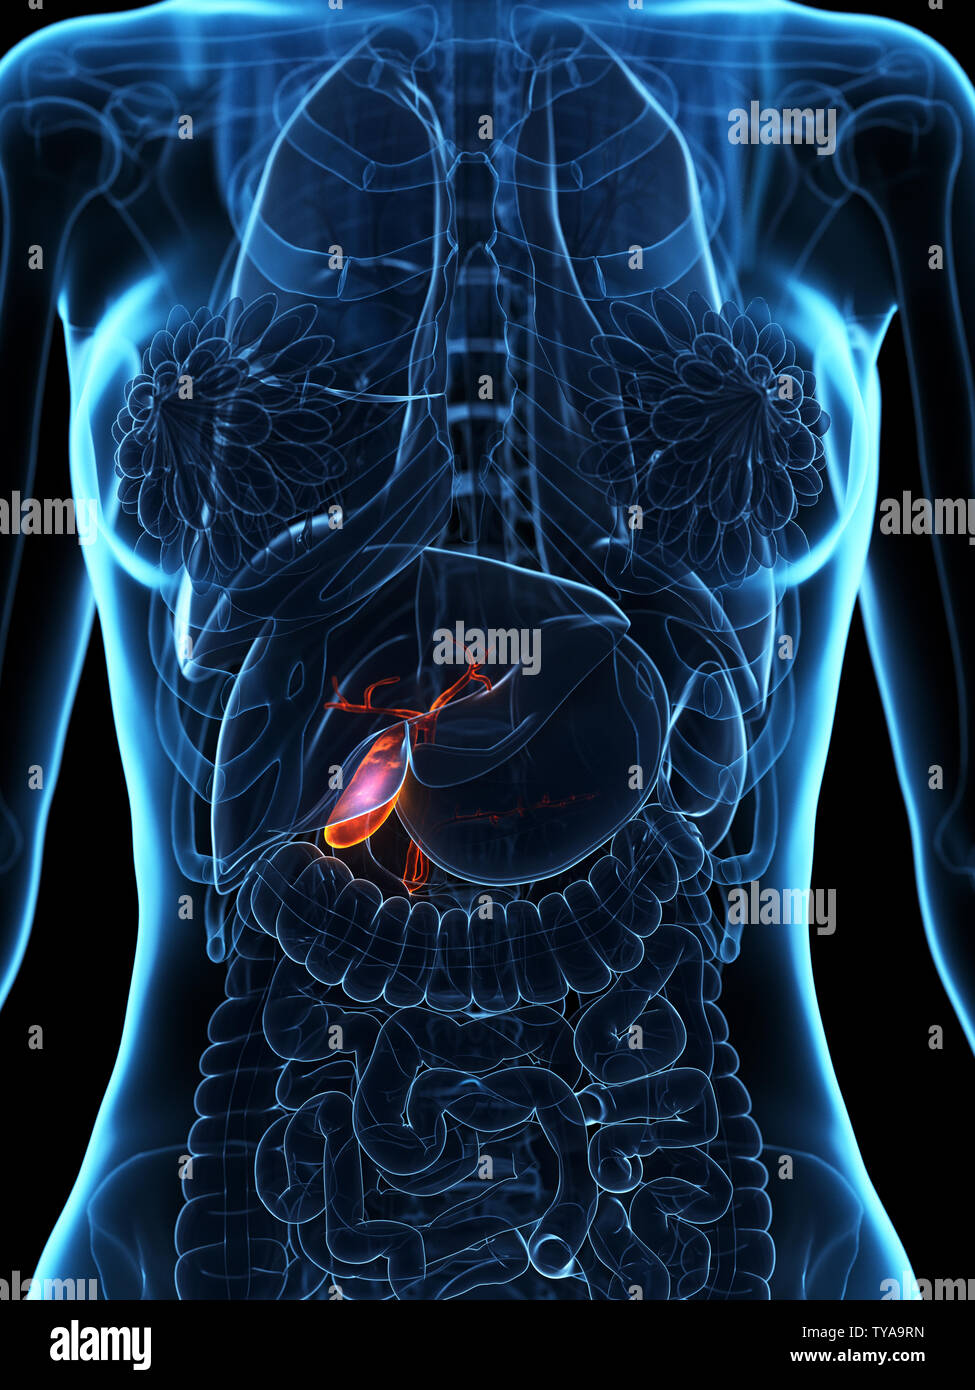 3d rendered medically accurate illustration of a diseased gallbladder Stock Photo